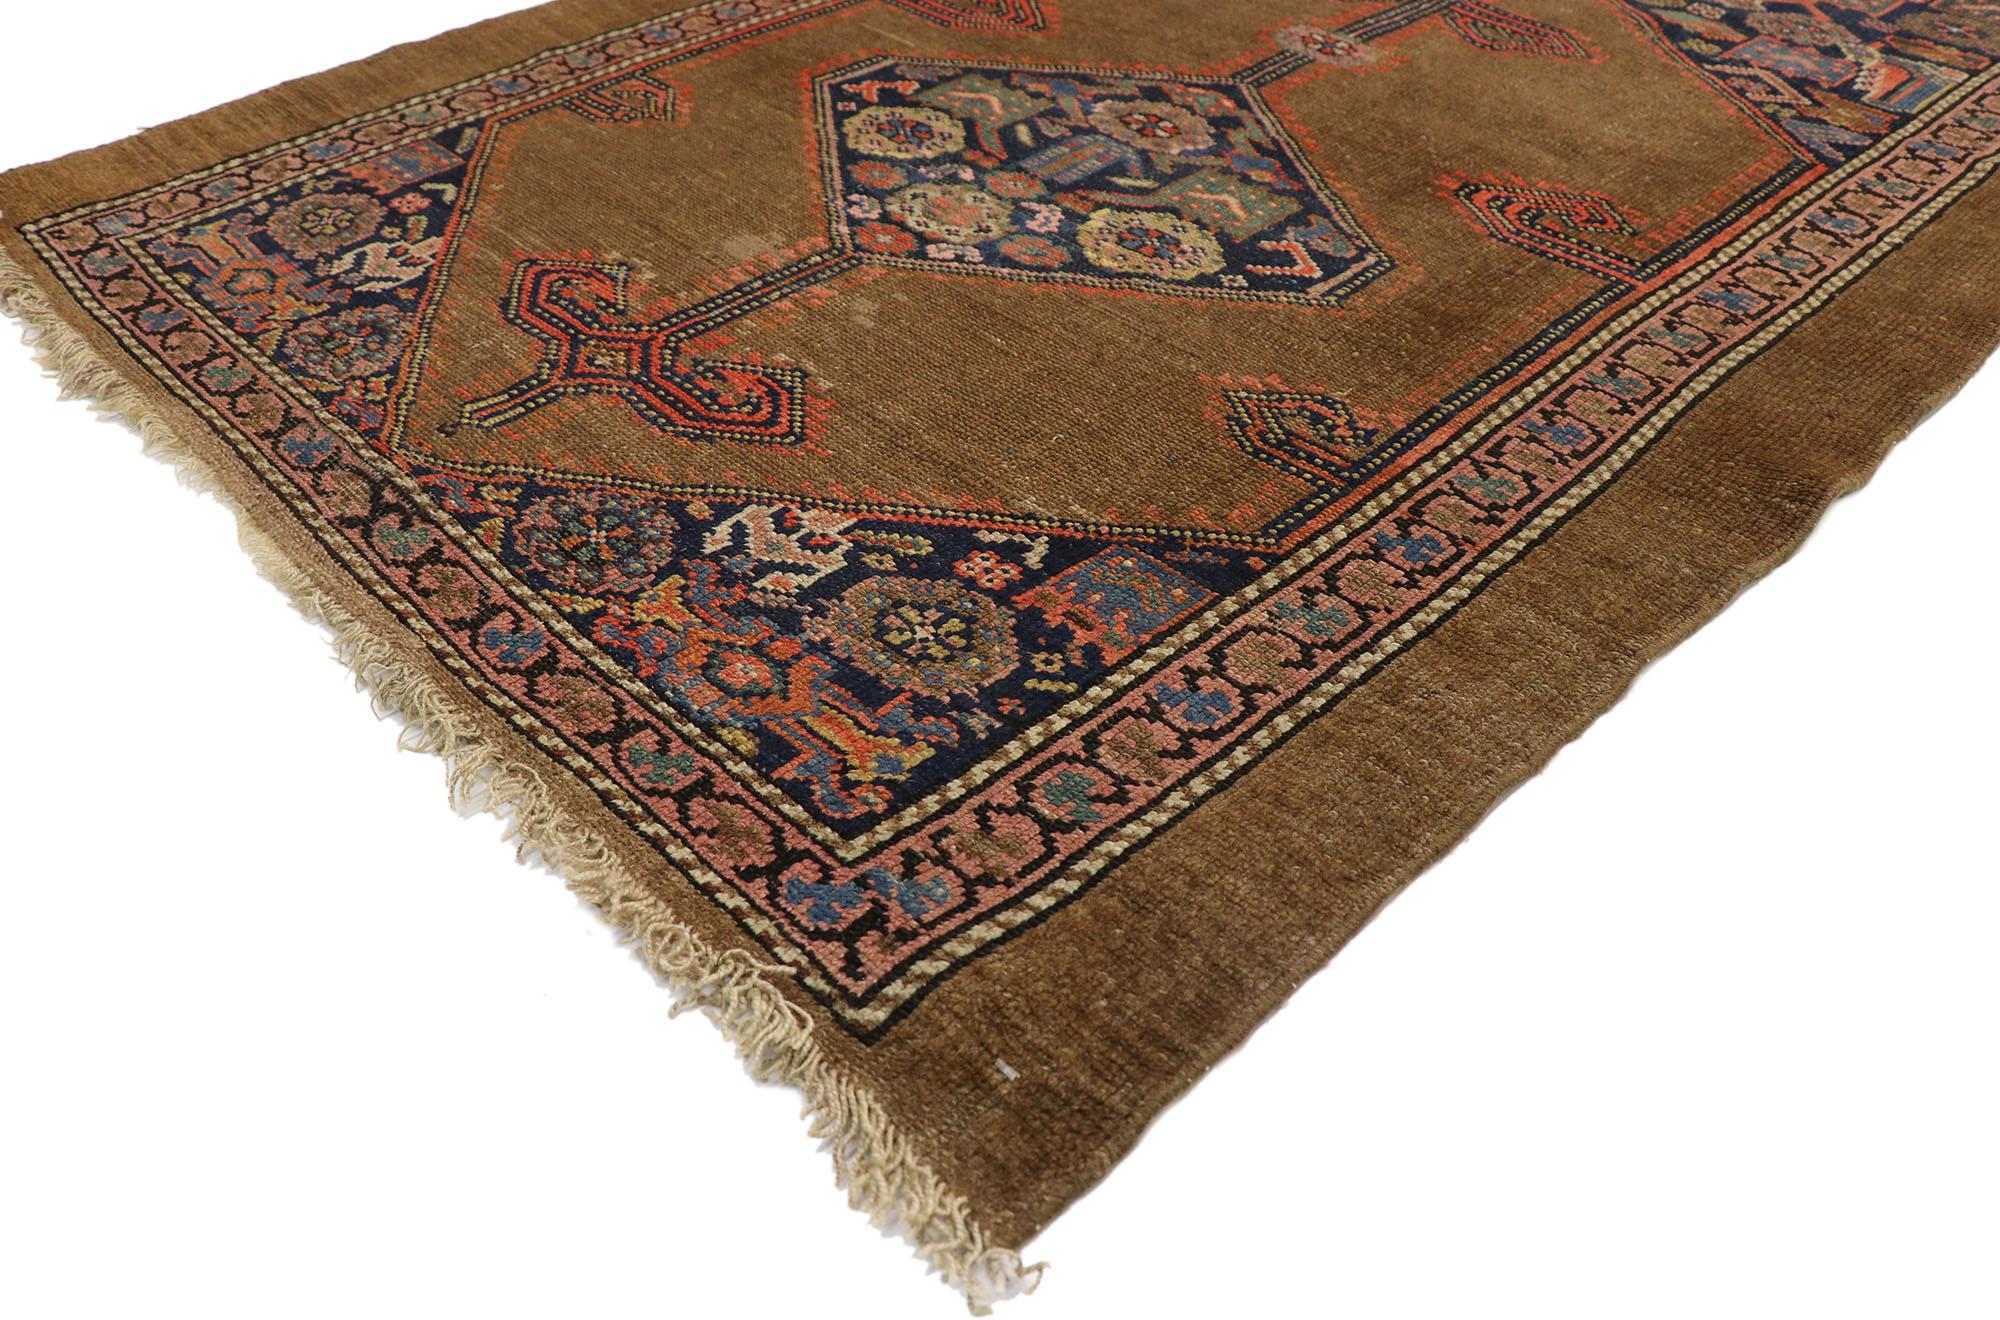 72313 Distressed Antique Persian Malayer Camel Hair Runner, Hallway Runner 03'07 x 14'08. Warm and rustic style meets unpretentious and simple. This distressed antique Persian Malayer gallery rug features three rhomboid hexagon medallions patterned